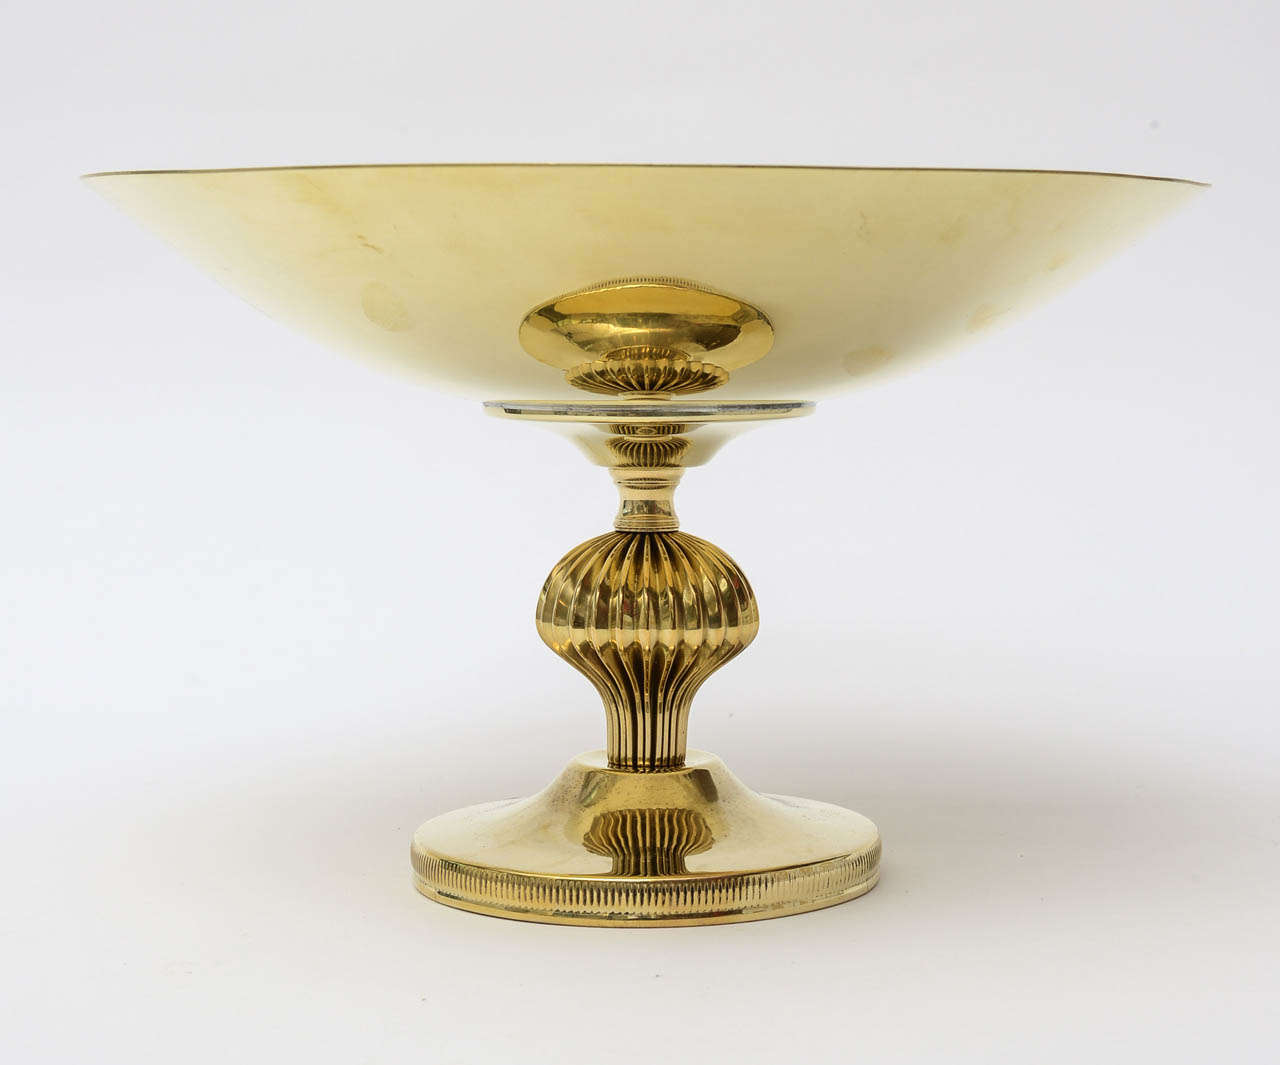 Great polished brass Pedestal bowl in the style of Tommi Parzinger.
it has a rimmed bottom with lines and a sculptural form in the middle.
The weight is on the lighter side...

NOTE: THIS WILL BE ON THE SATURDAY SALE FOR 1 WEEK ONLY  THRU MAY